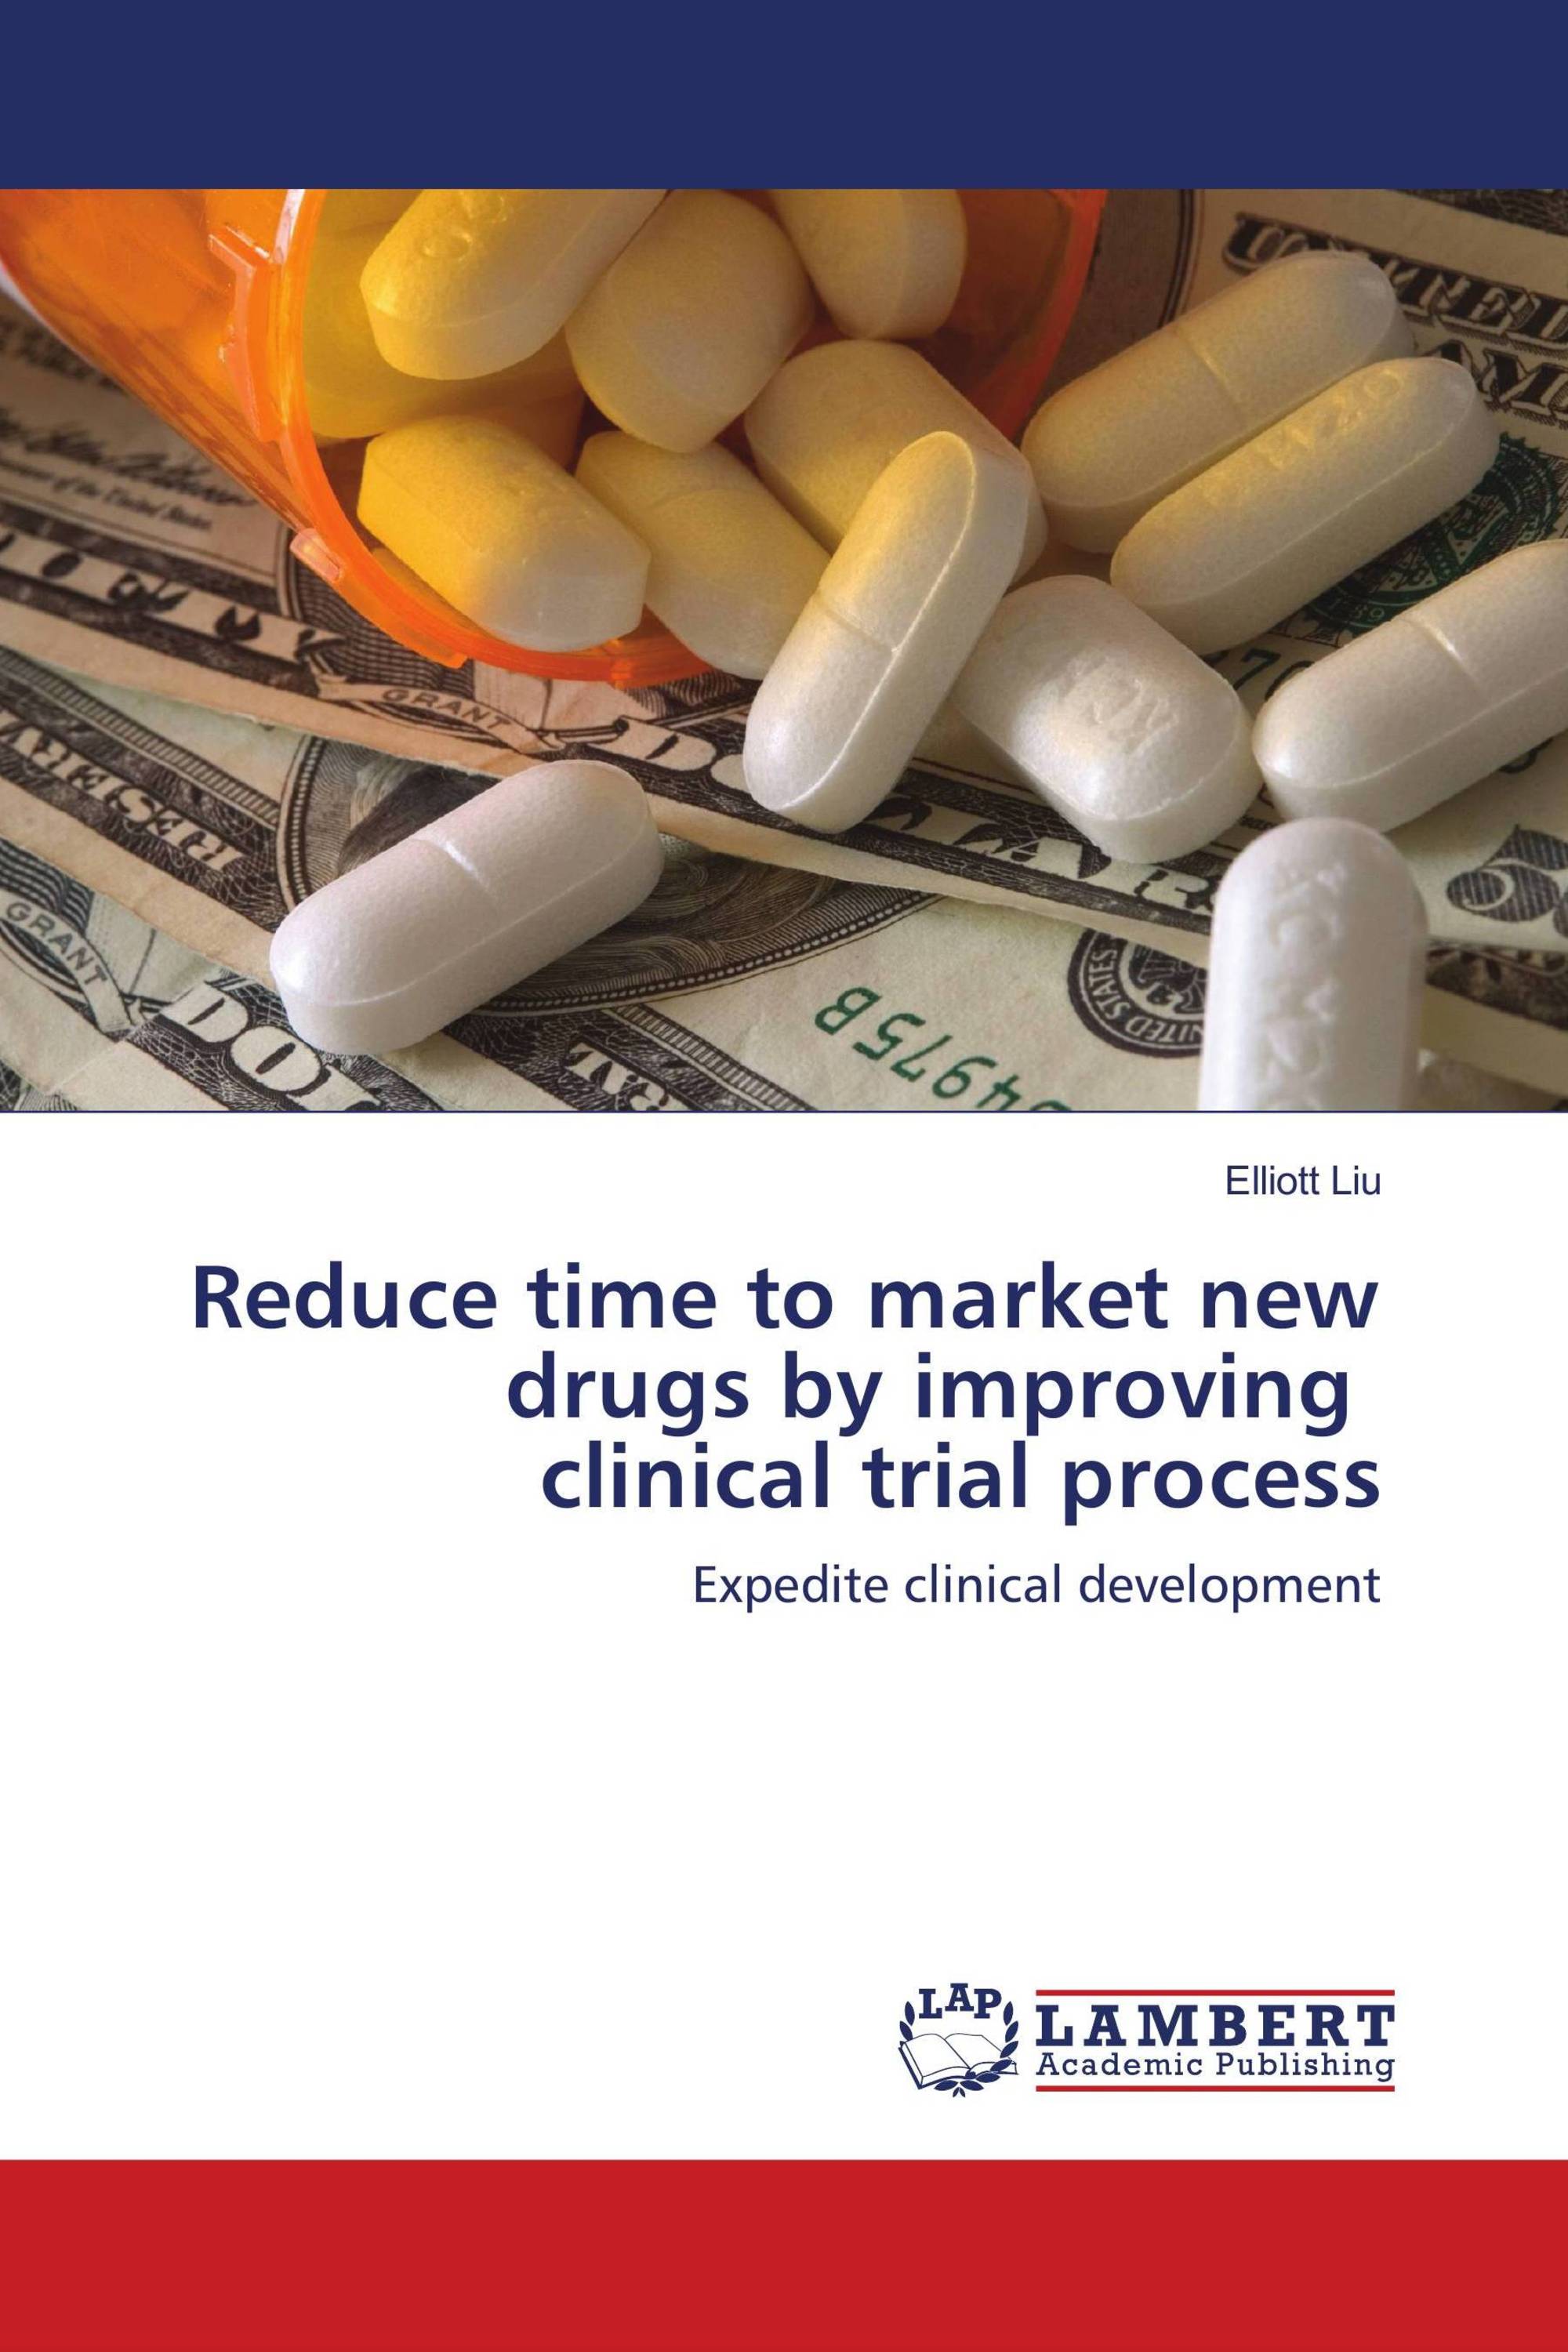 Reduce time to market new drugs by improving clinical trial process